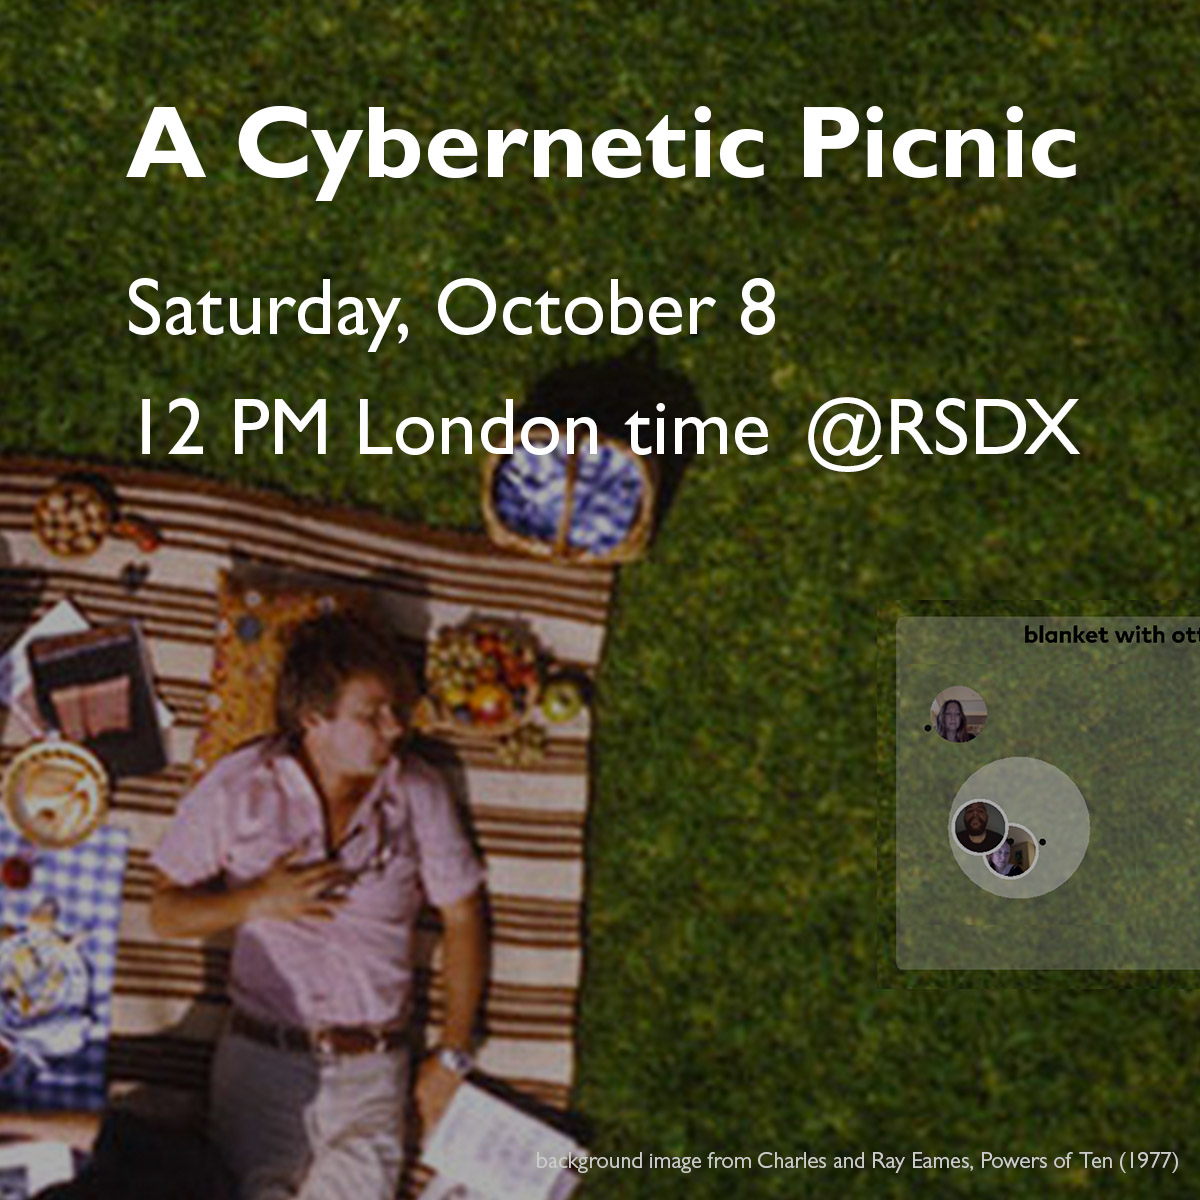 A Cybernetic Picnic at RSDX, title image